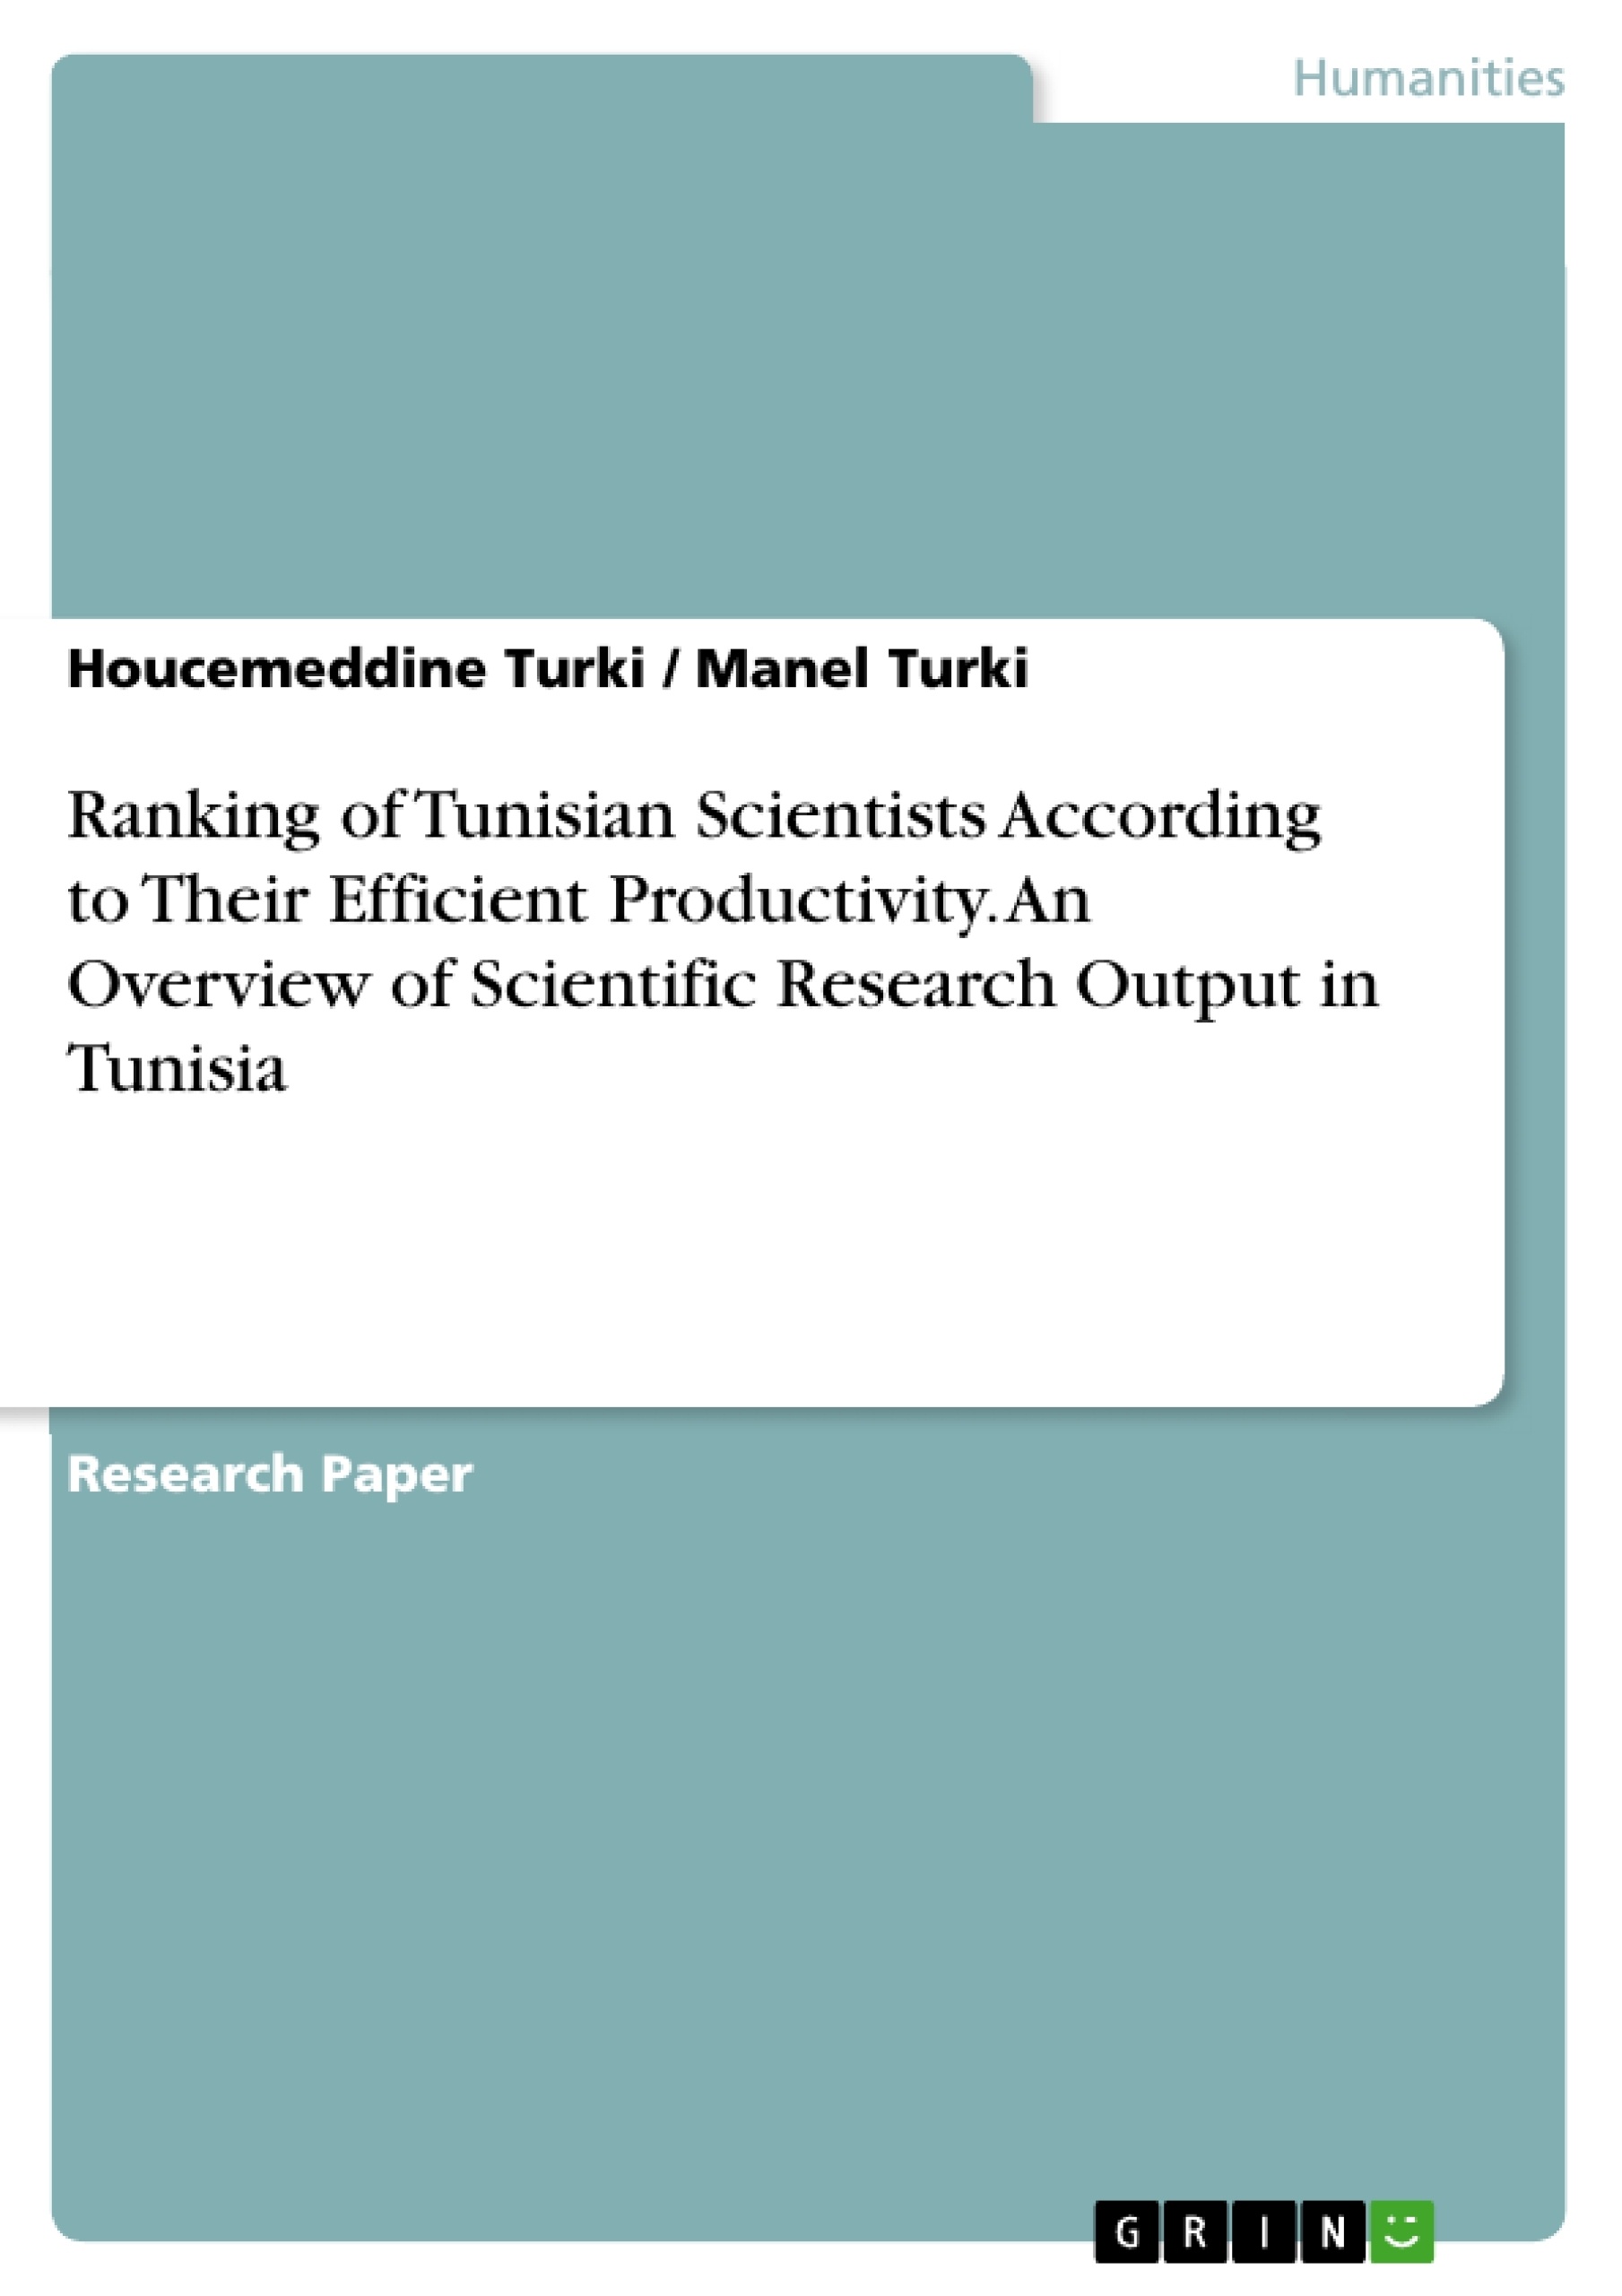 Título: Ranking of Tunisian Scientists According to Their Efficient Productivity. An Overview of Scientific Research Output in Tunisia